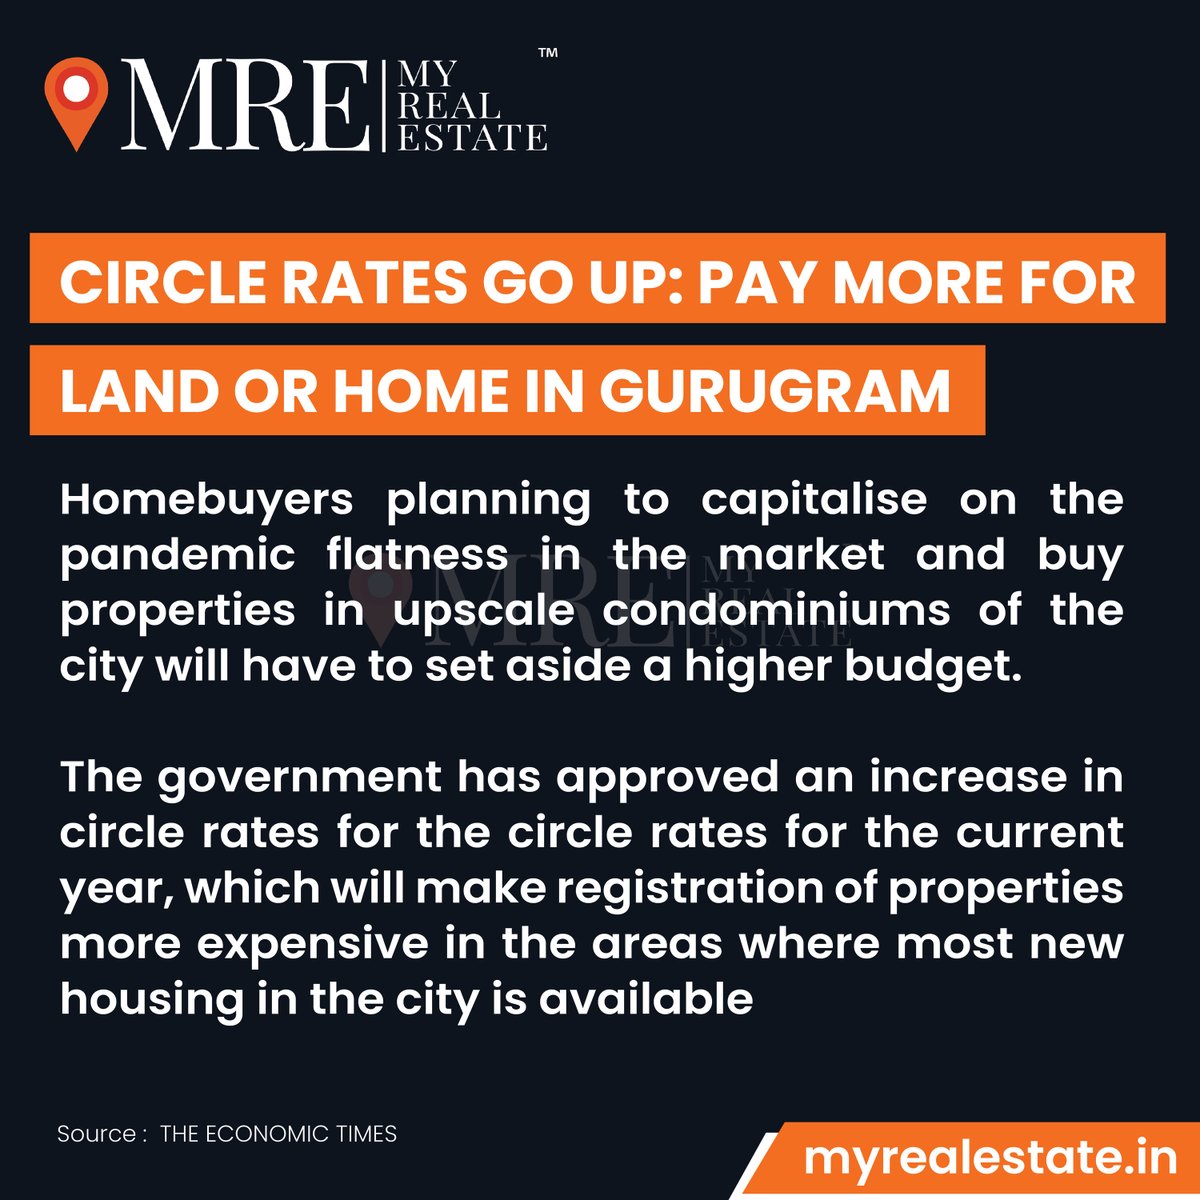 Realestate News!! Circle Rate go up in #Gurugram, Now you have to pay more for land or home in Gurugram. #gurgaon #gurgoannews #MRE #myrealestate #realestate #gurgoanrealestate #realestatenews